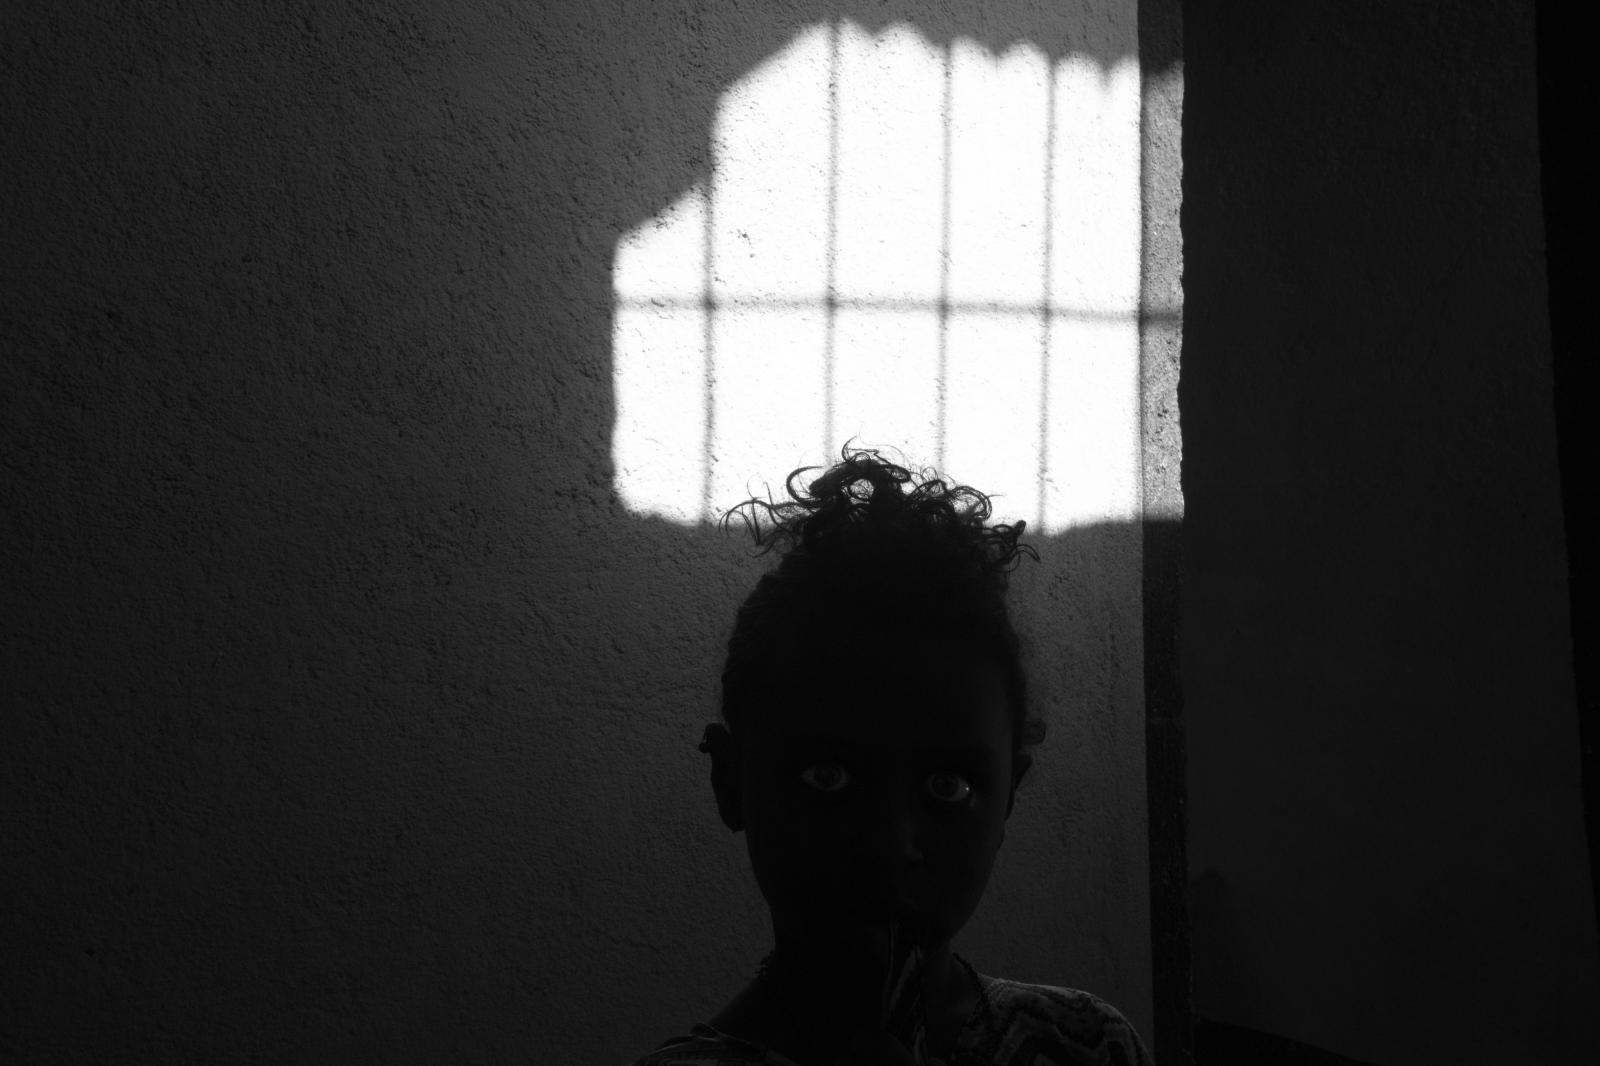 The imprisoned girl has no faul... with her mother. Adwa Ethiopia